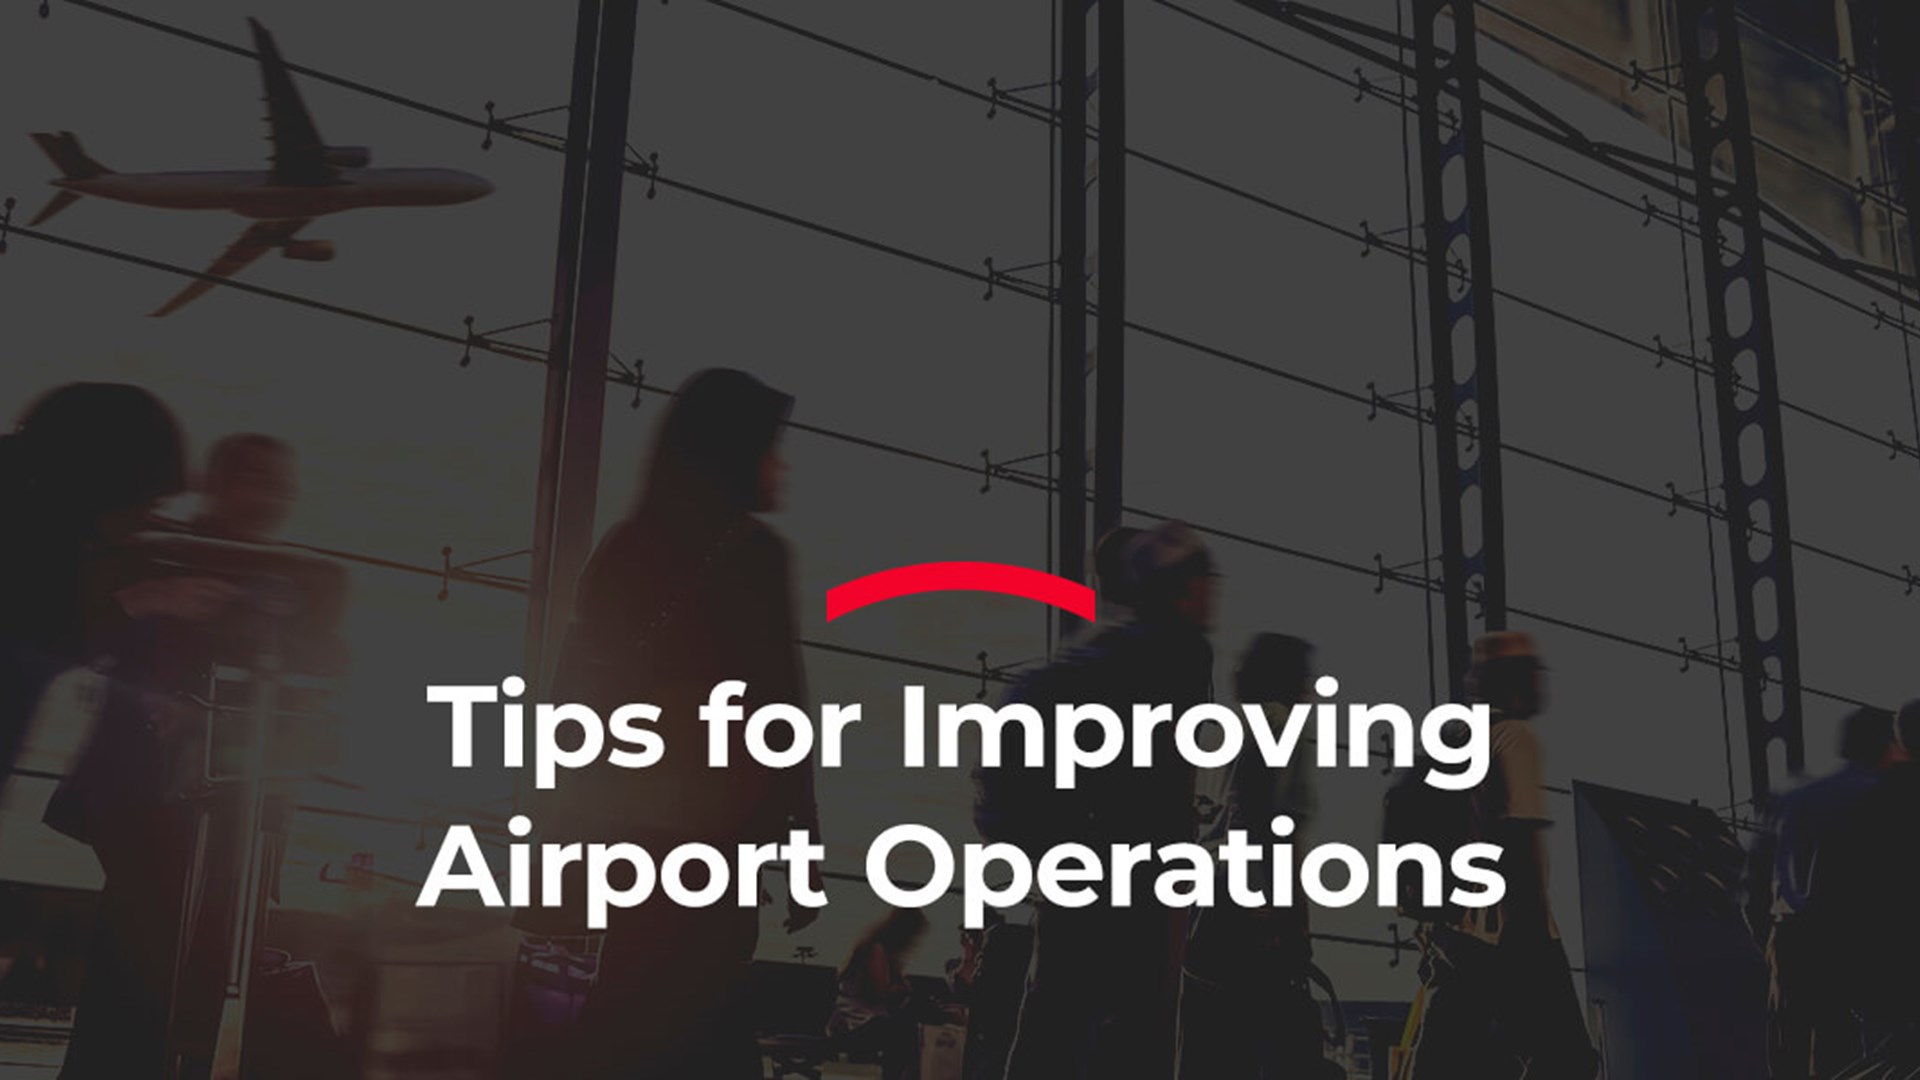 Tips for Improving Airport Operations